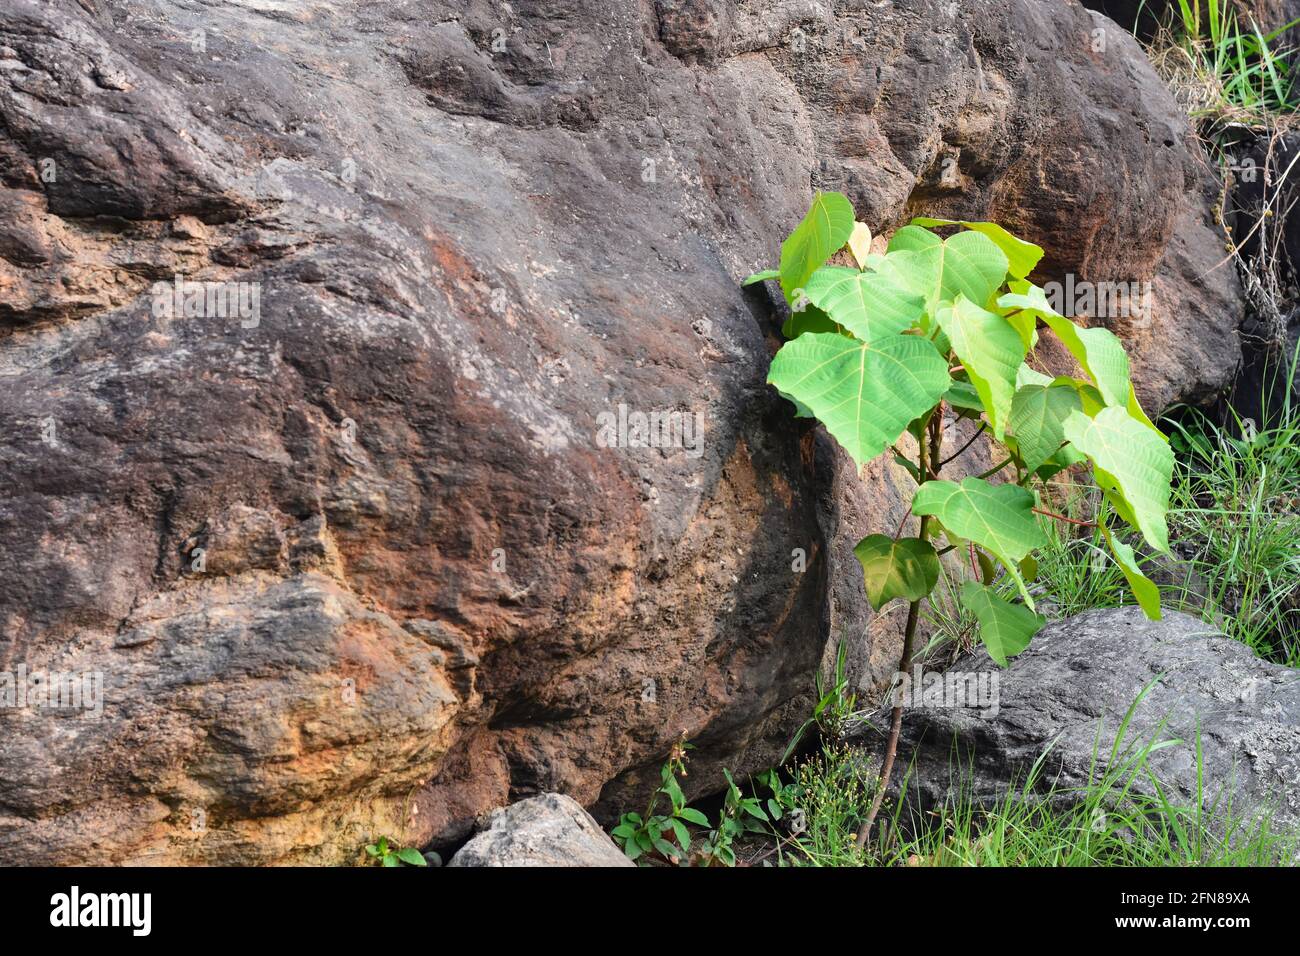 Green plant growing on a rock and stone with moss carpet in the woods. Stock Photo